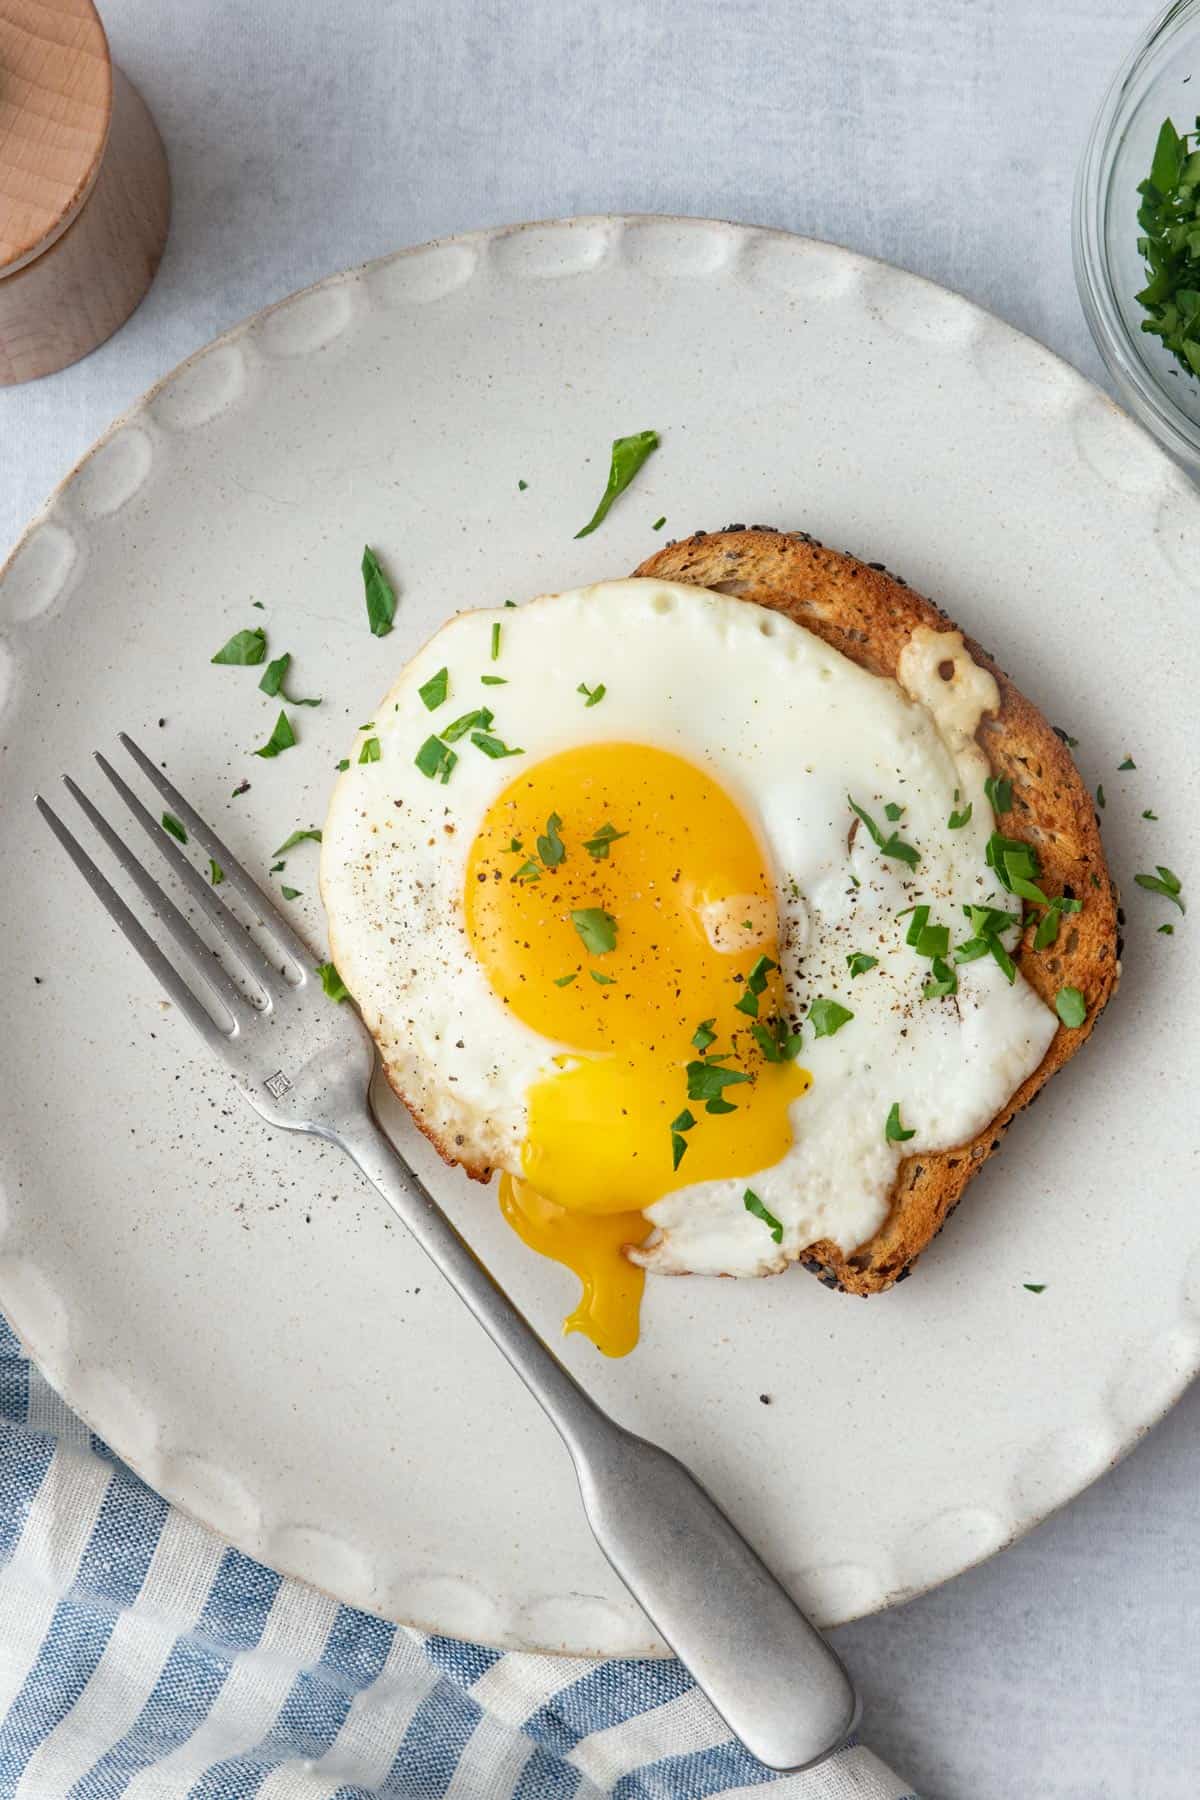 Sunny side up egg over a slice of toast with the yolk broken garnished with fresh herbs on a plate with a fork next to it.